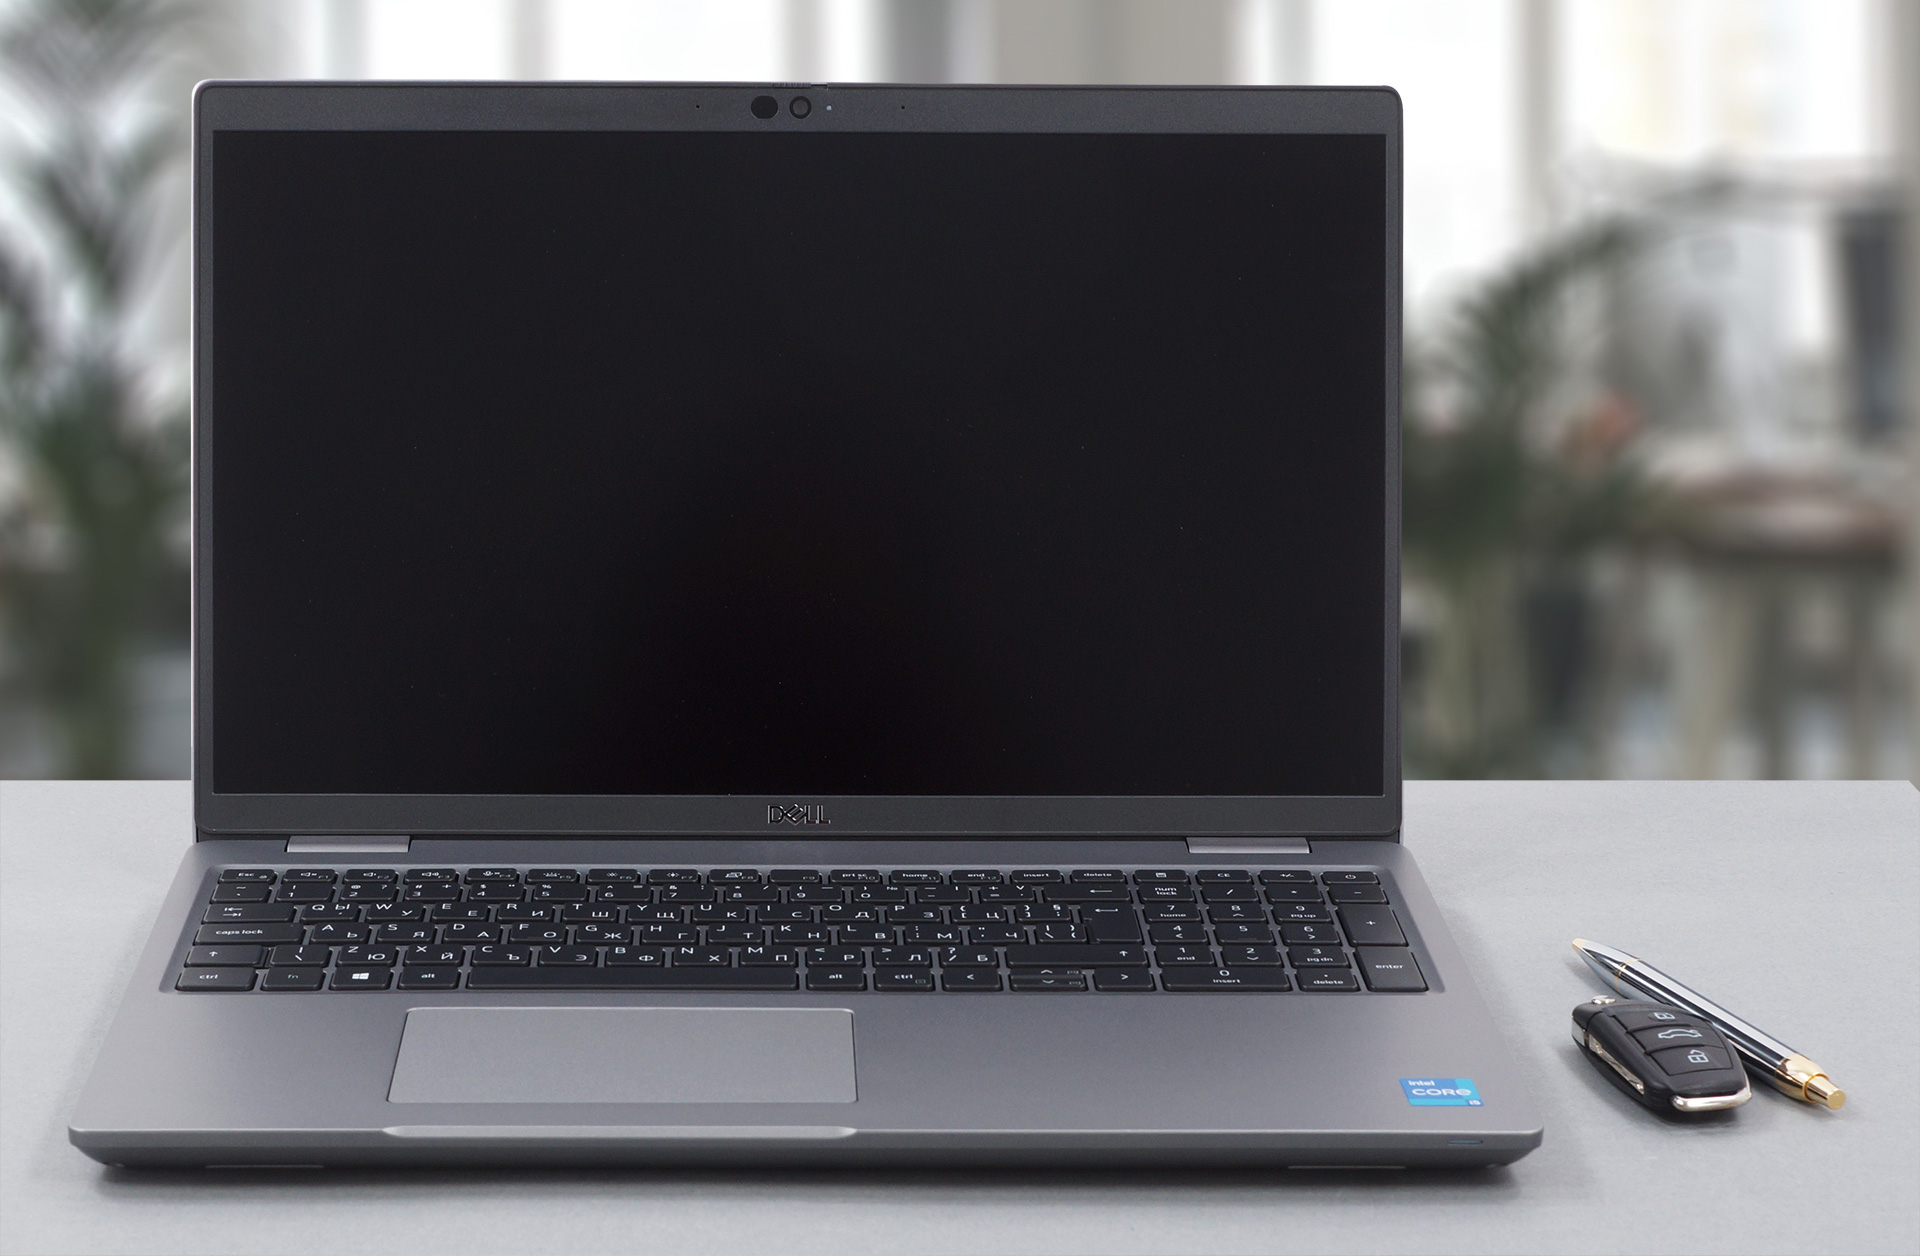 Dell Latitude 15 5521 review - boring but quite powerful